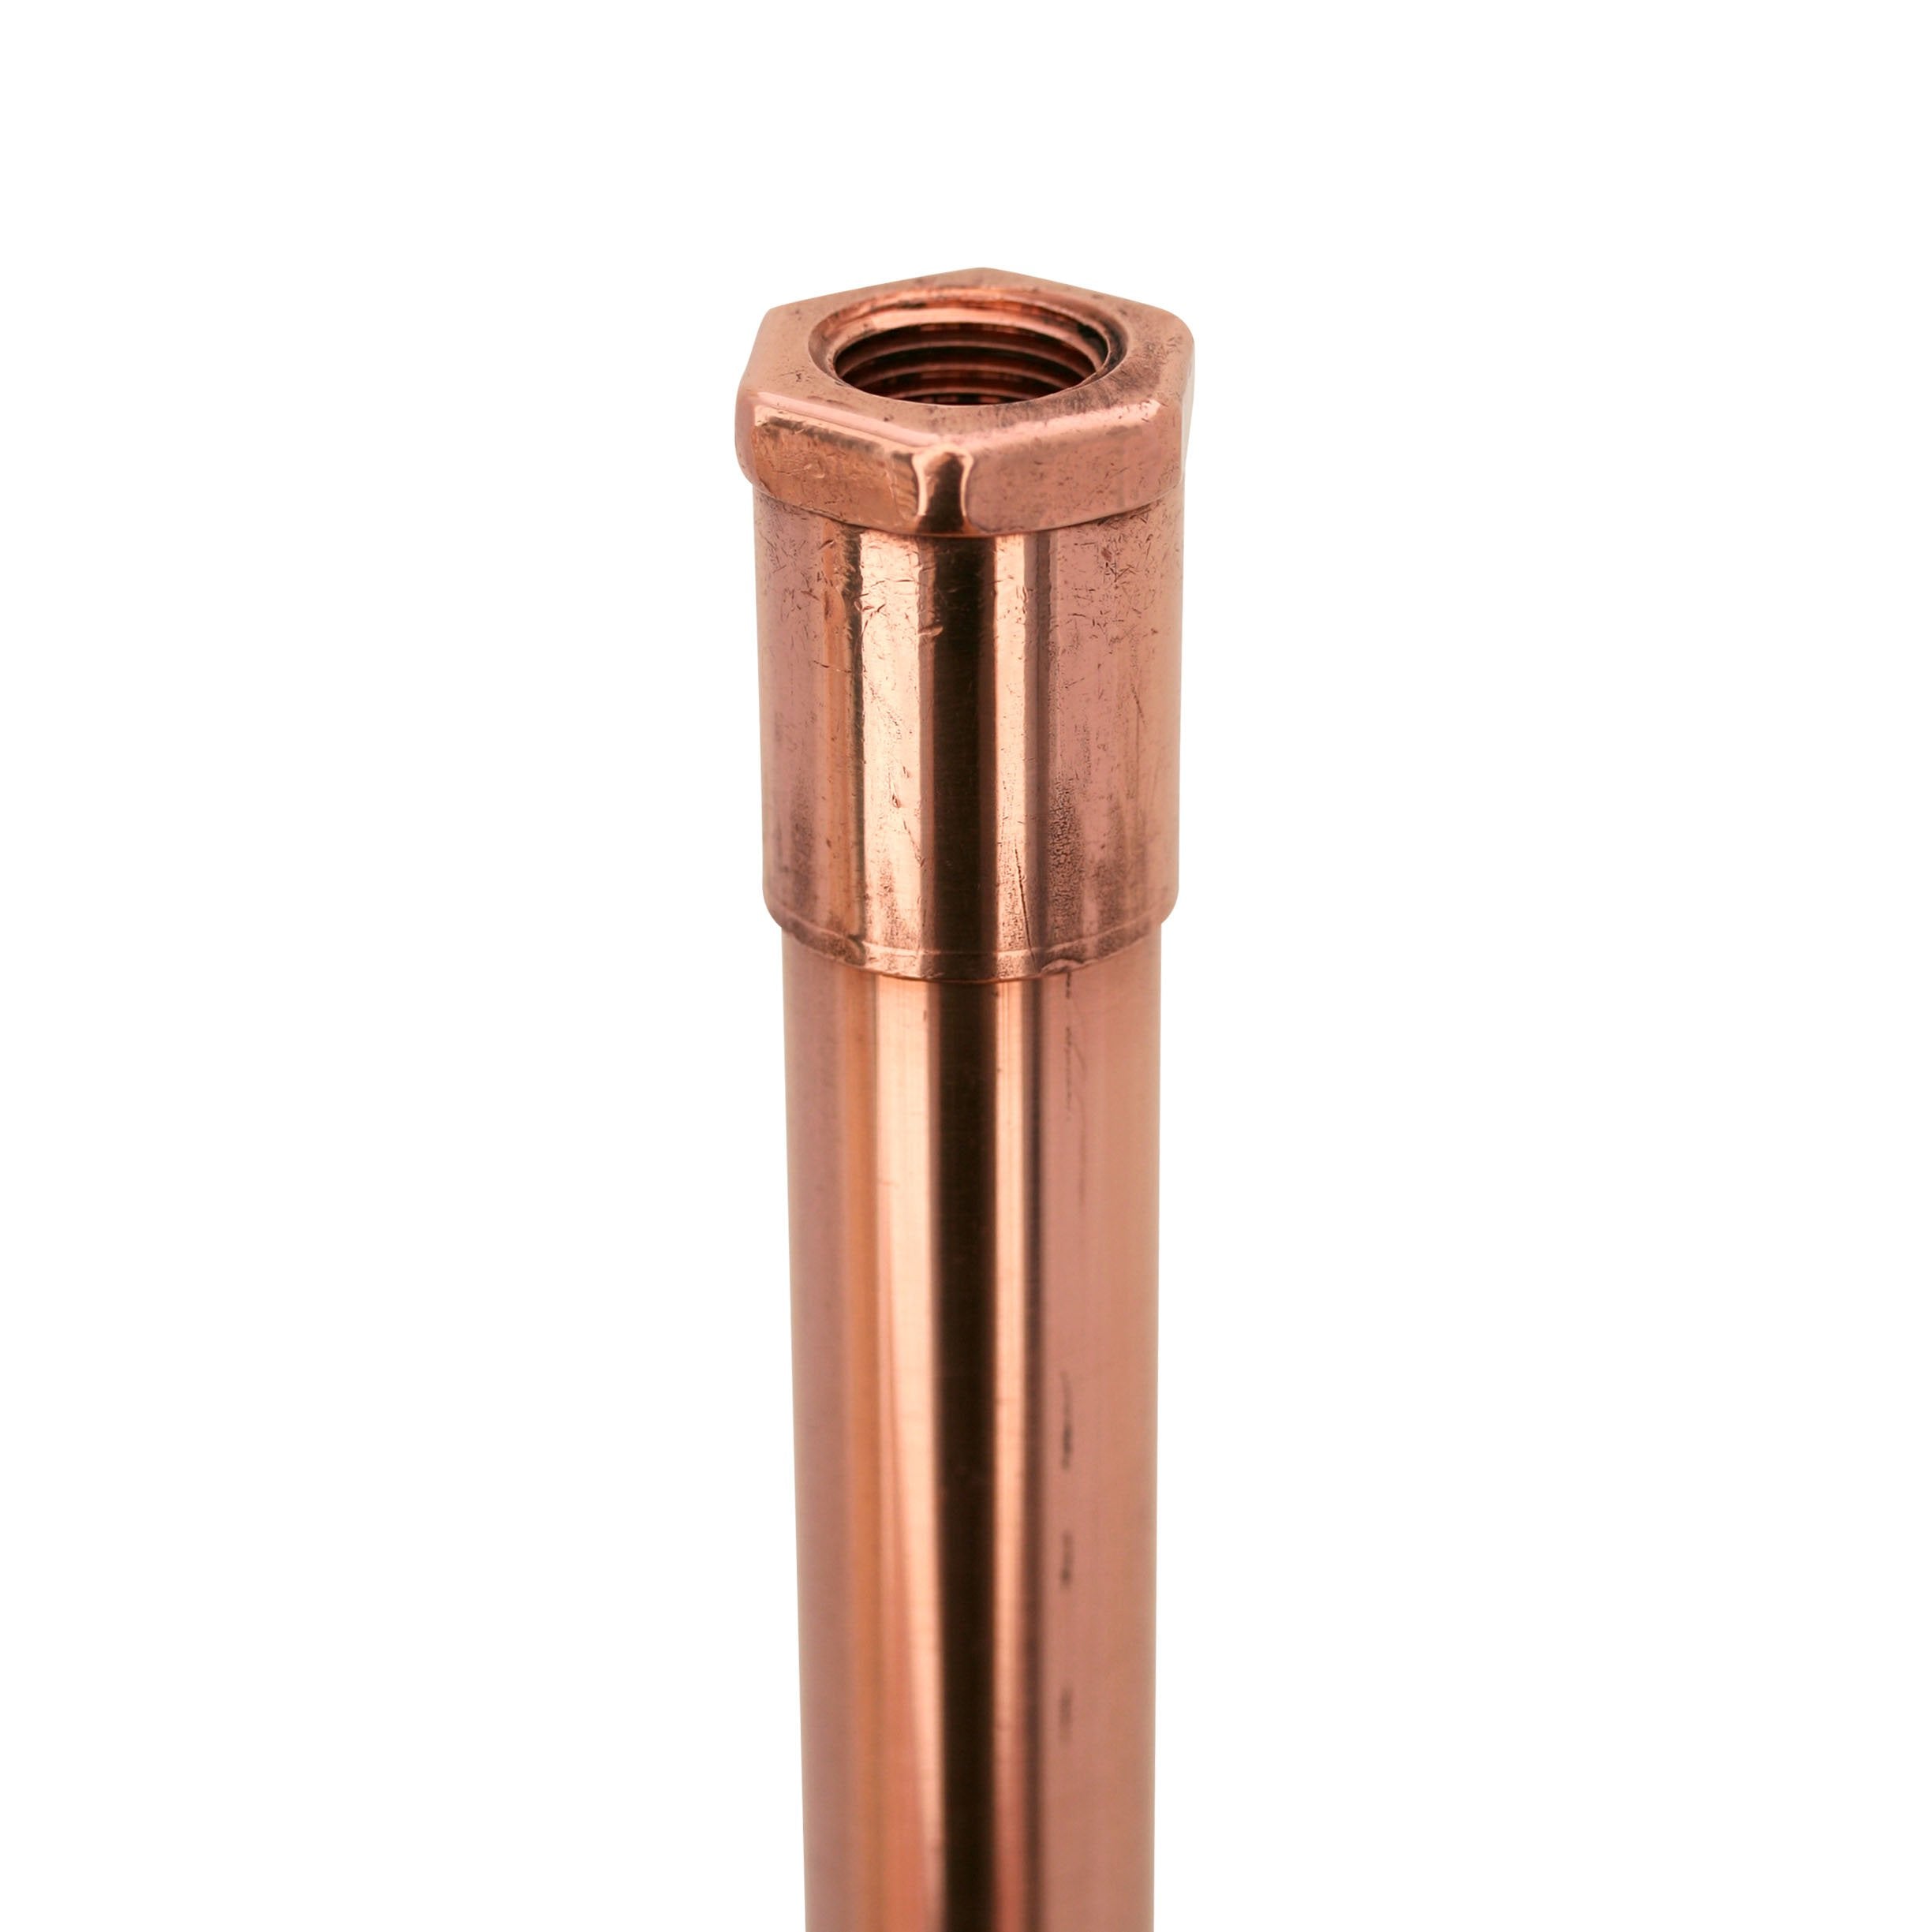 CopperMoon Custom Copper Stem ONLY for CM.4017 path light